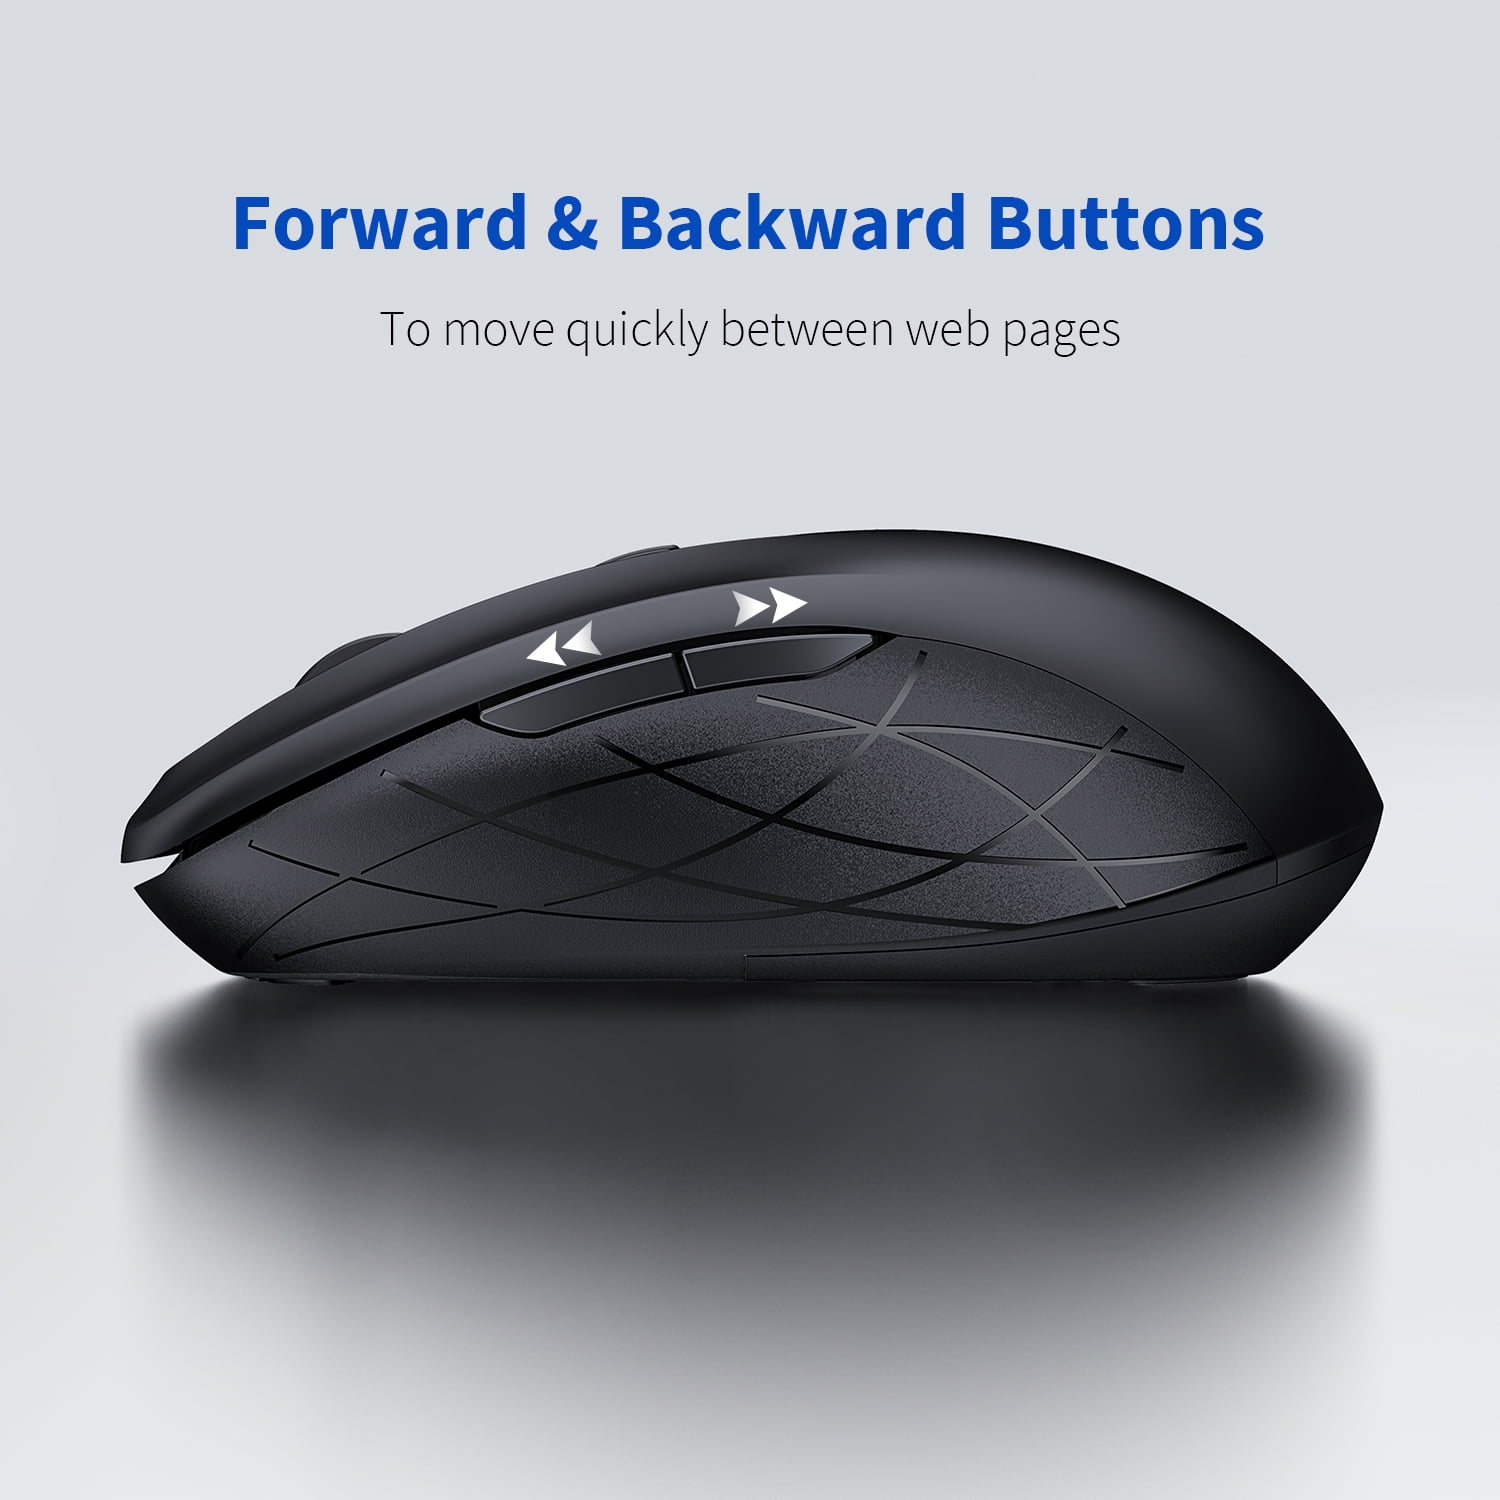 BT1+BT2+2.4G 3 Adjustable DPI Levels Bluetooth Mouse Vssoplor Wireless Mouse Multi-Device Mouse 6 Buttons Portable Mouse Compatible for Windows//Mac OS/Android-Black 